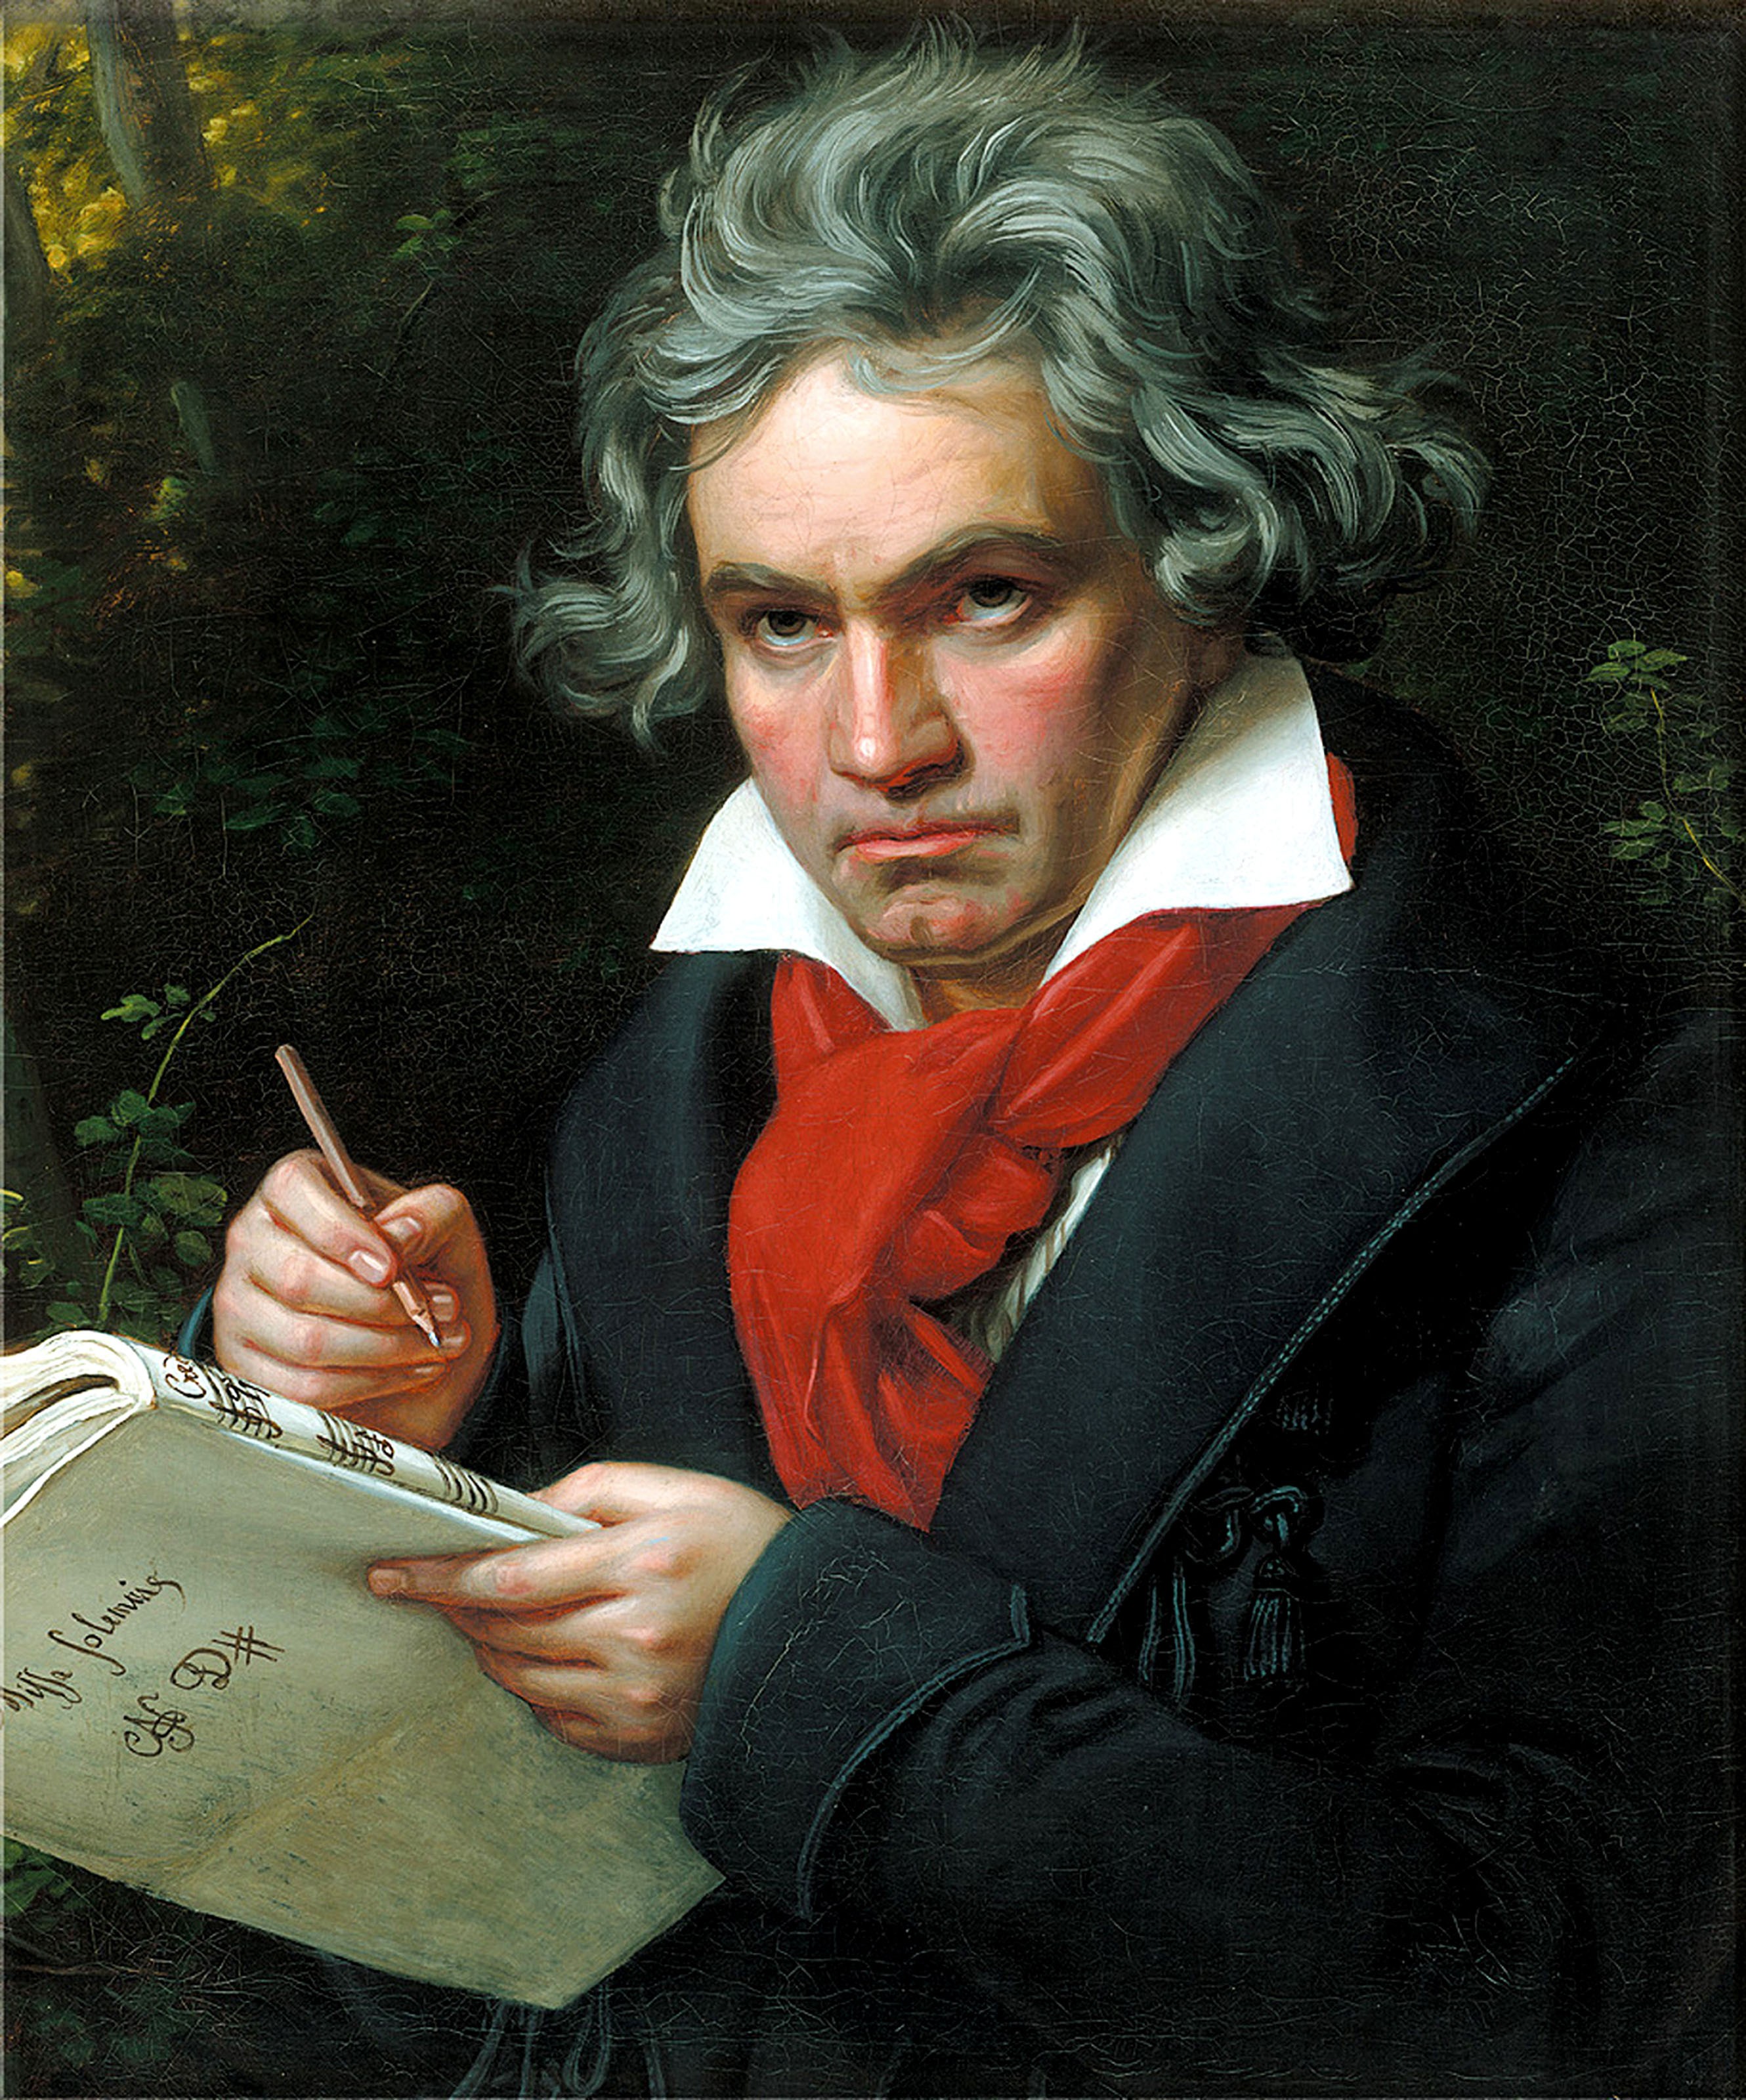 Detail from a portrait of Ludwig van Beethoven by Joseph Karl Stieler. The Hong Kong Philharmonic Orchestra will celebrate the 250th anniversary of the composer’s birth in the coming two seasons. Photo: Alamy